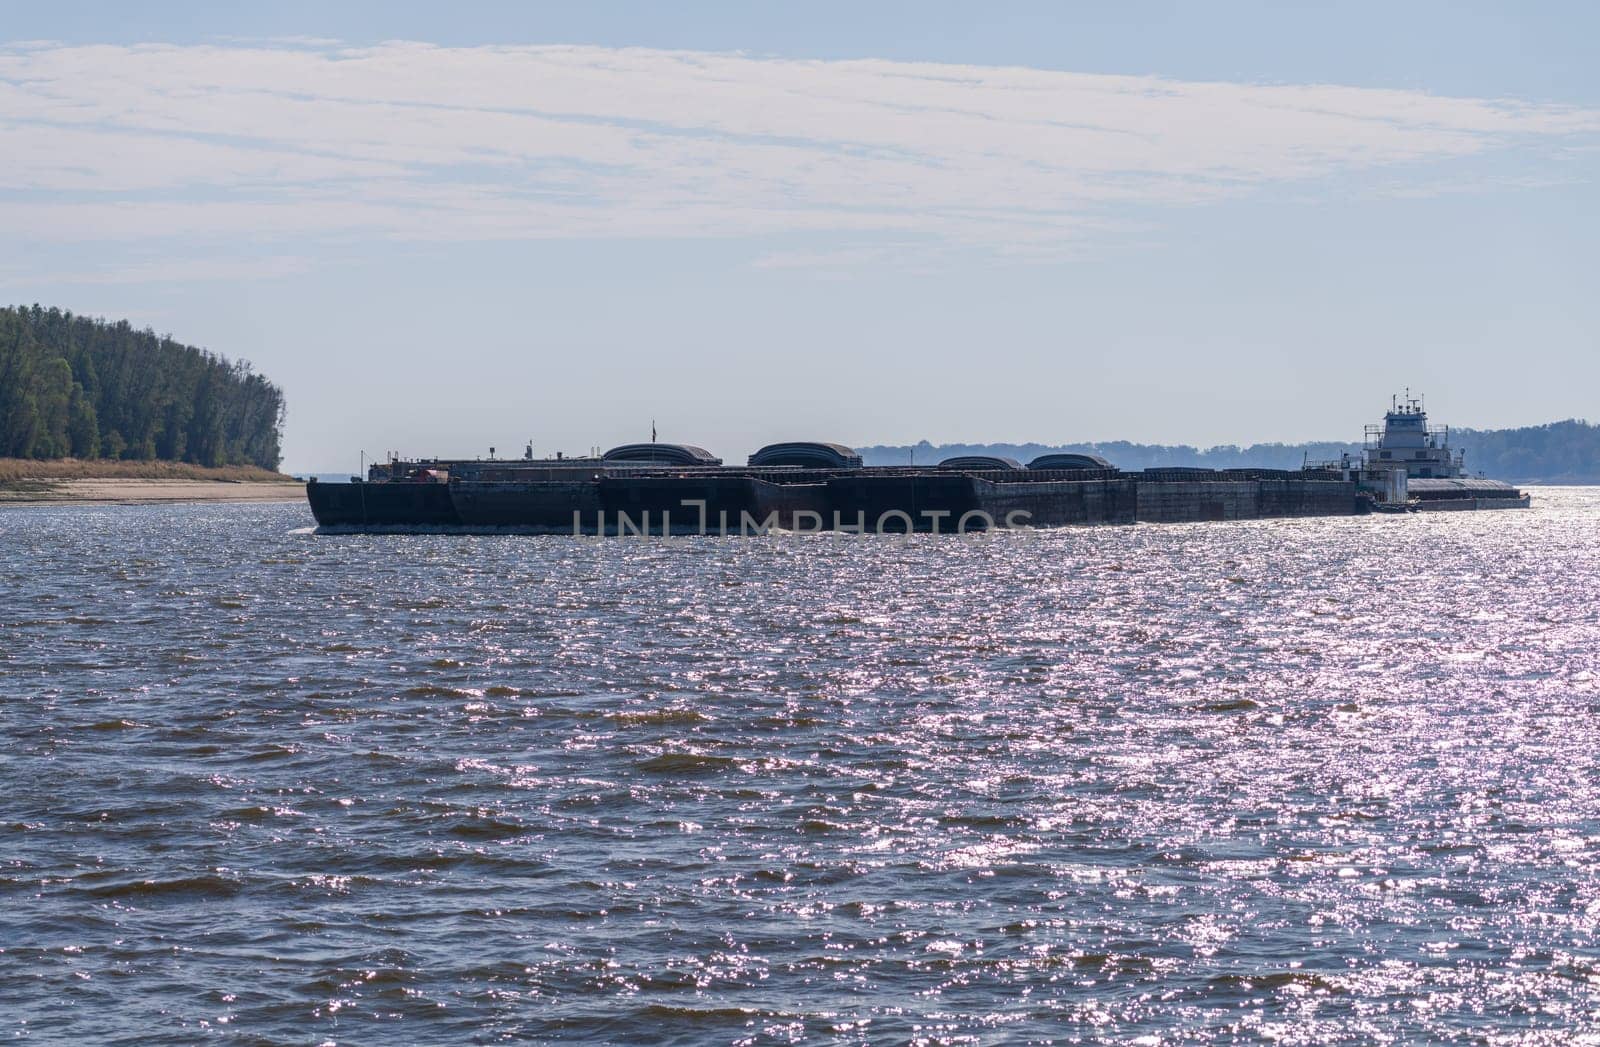 Panorama of sand banks due to extreme low water conditions on Mississippi river in October 2023 with a large barge rounding a bend near Greenville, MS